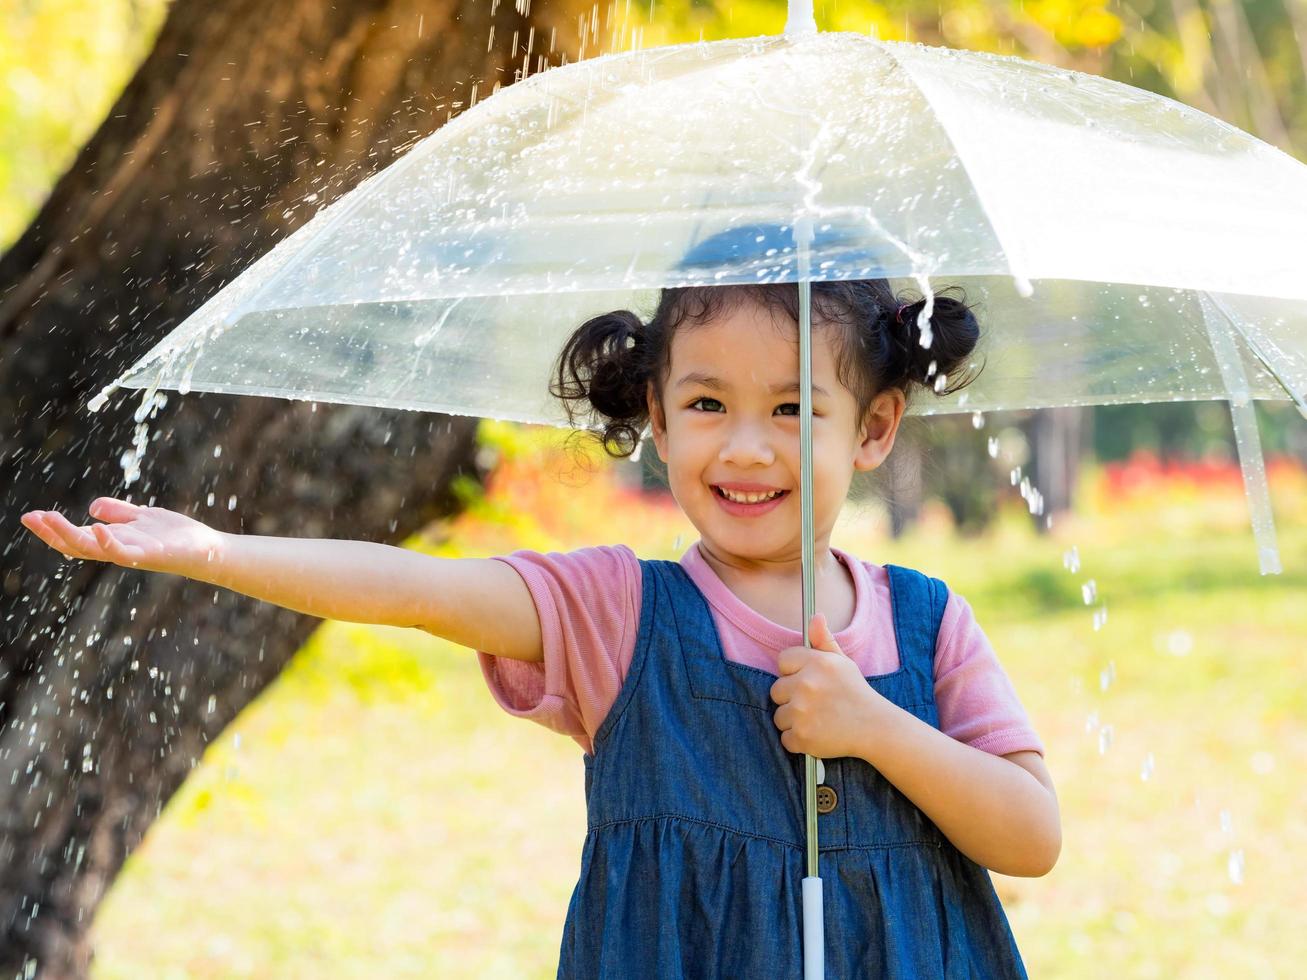 A little girl was happily standing in an umbrella against the rain photo